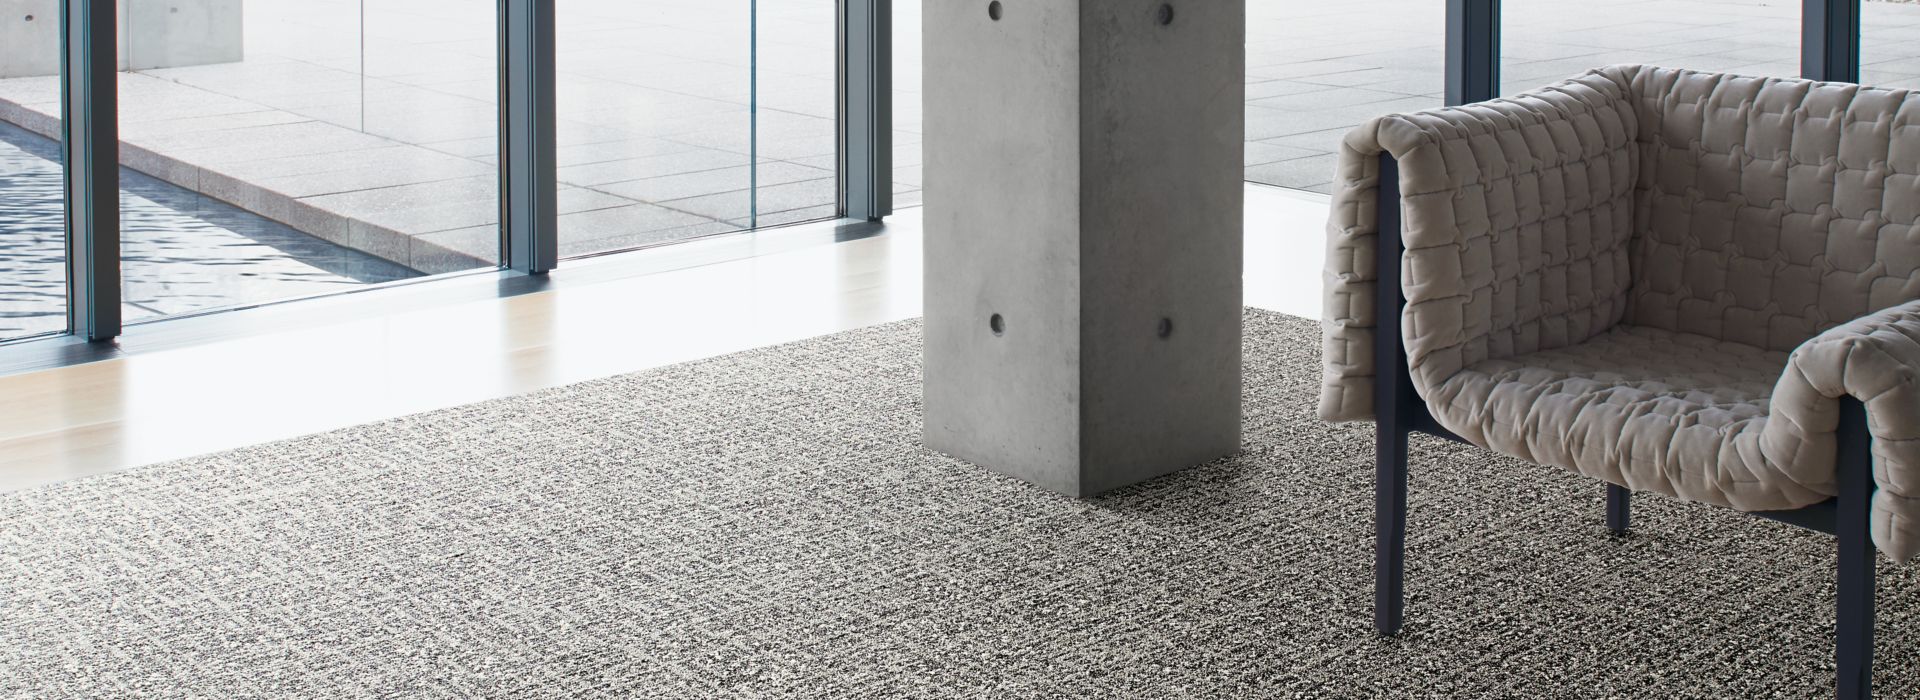 Interface WW890 plank carpet tile and Textured Stones LVT in lobby area with chair image number 1